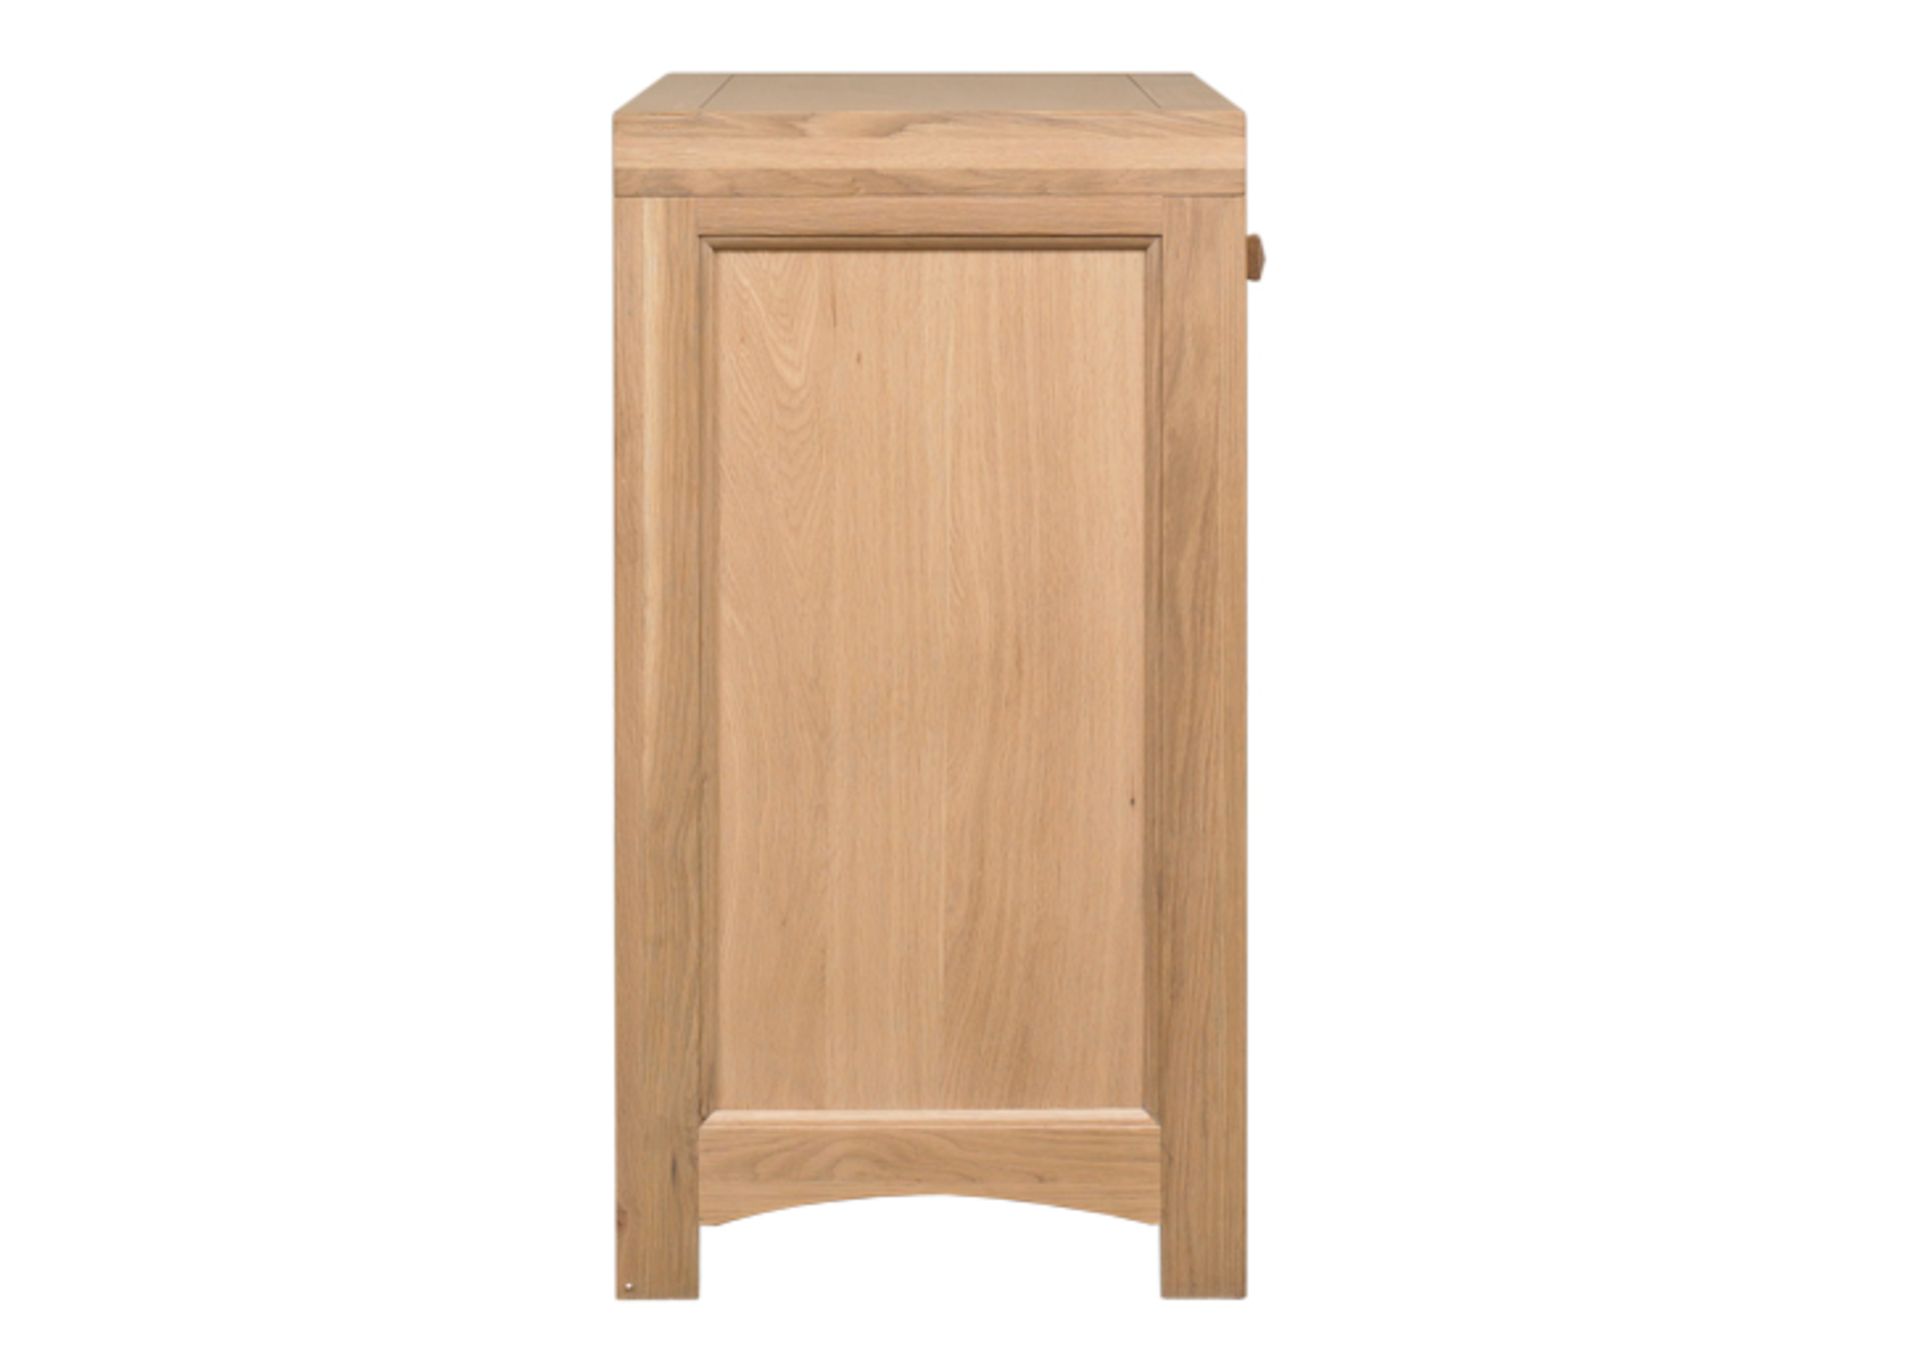 1 x Mark Webster Buckingham Small Sideboad - Two Door/Two Drawer - White Wash Oak With a Timeless - Image 3 of 4